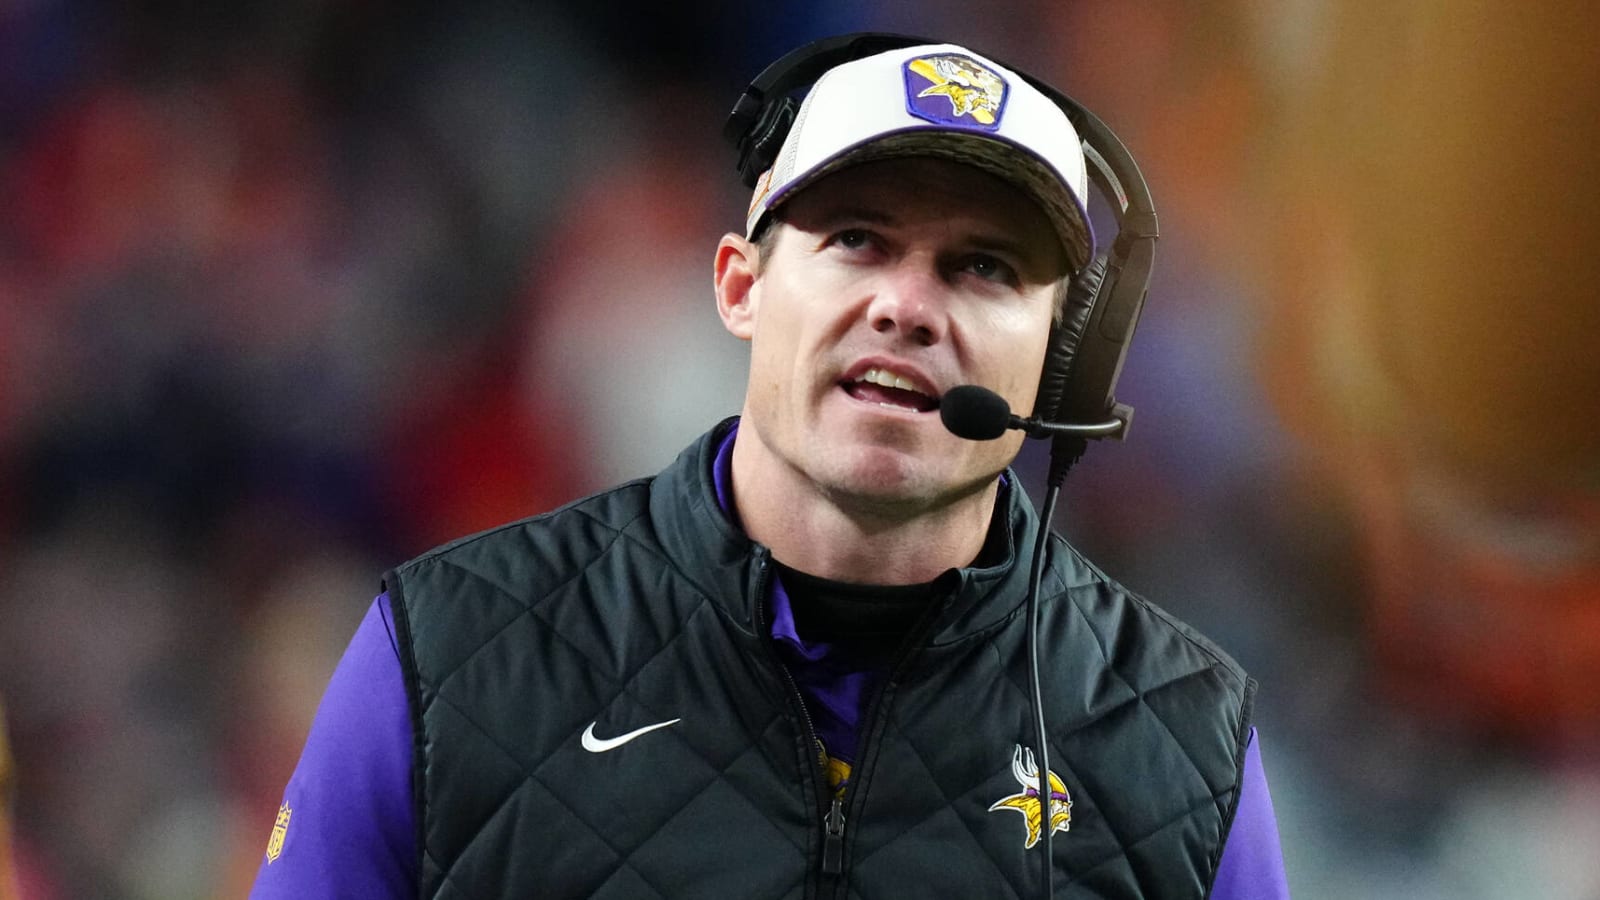 Vikings' performance leaves HC with huge decision